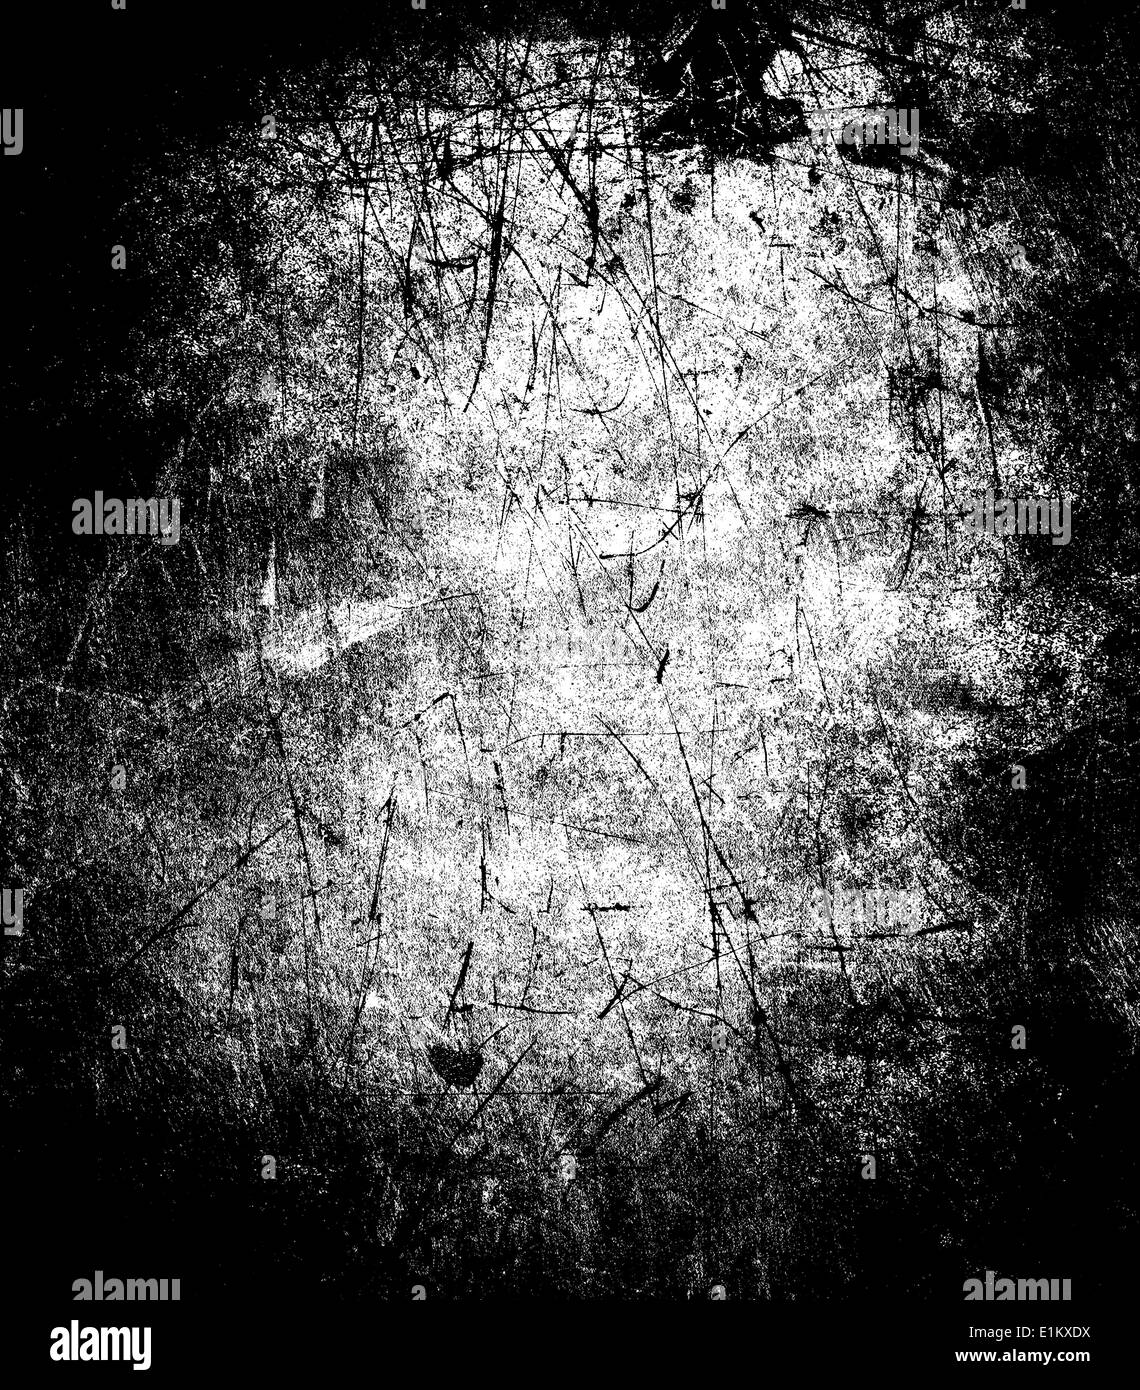 Grunge background with scratches in black and white Stock Photo